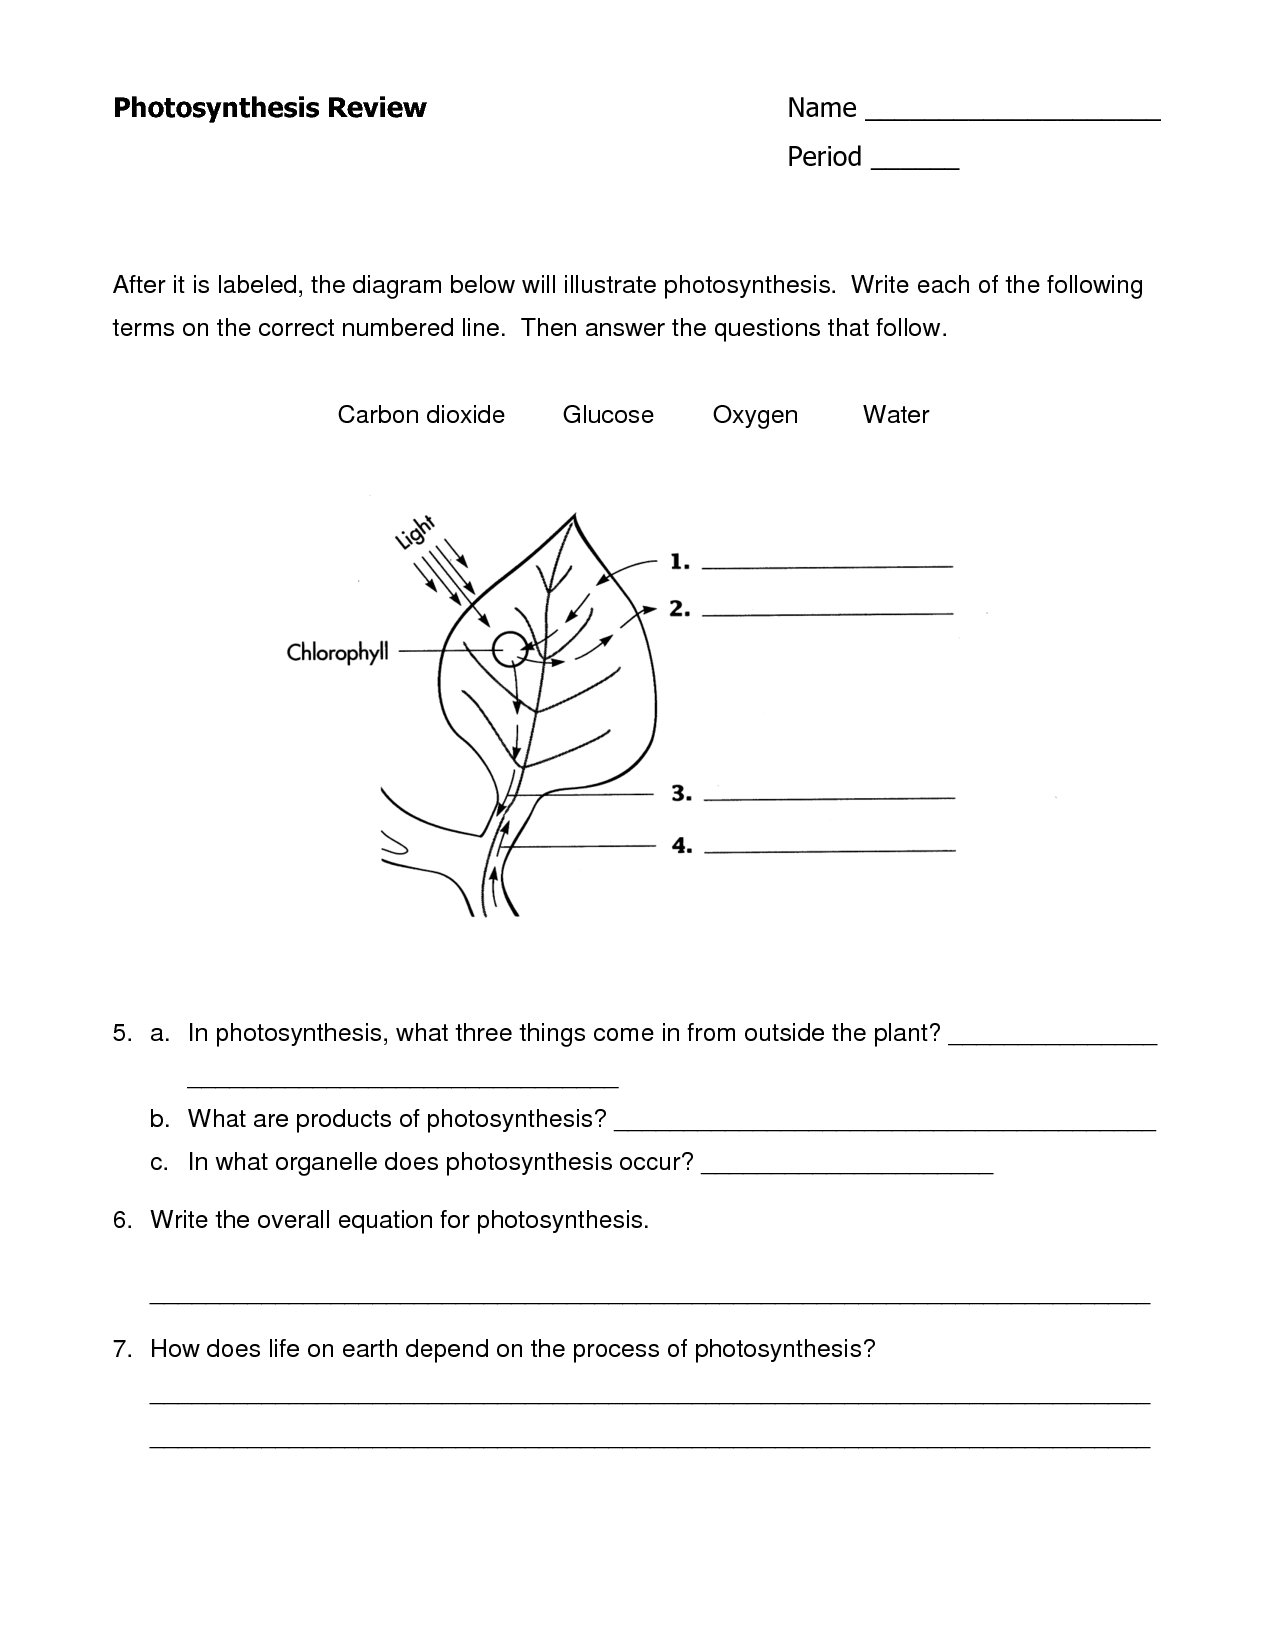 15-photosynthesis-review-worksheet-with-answers-worksheeto